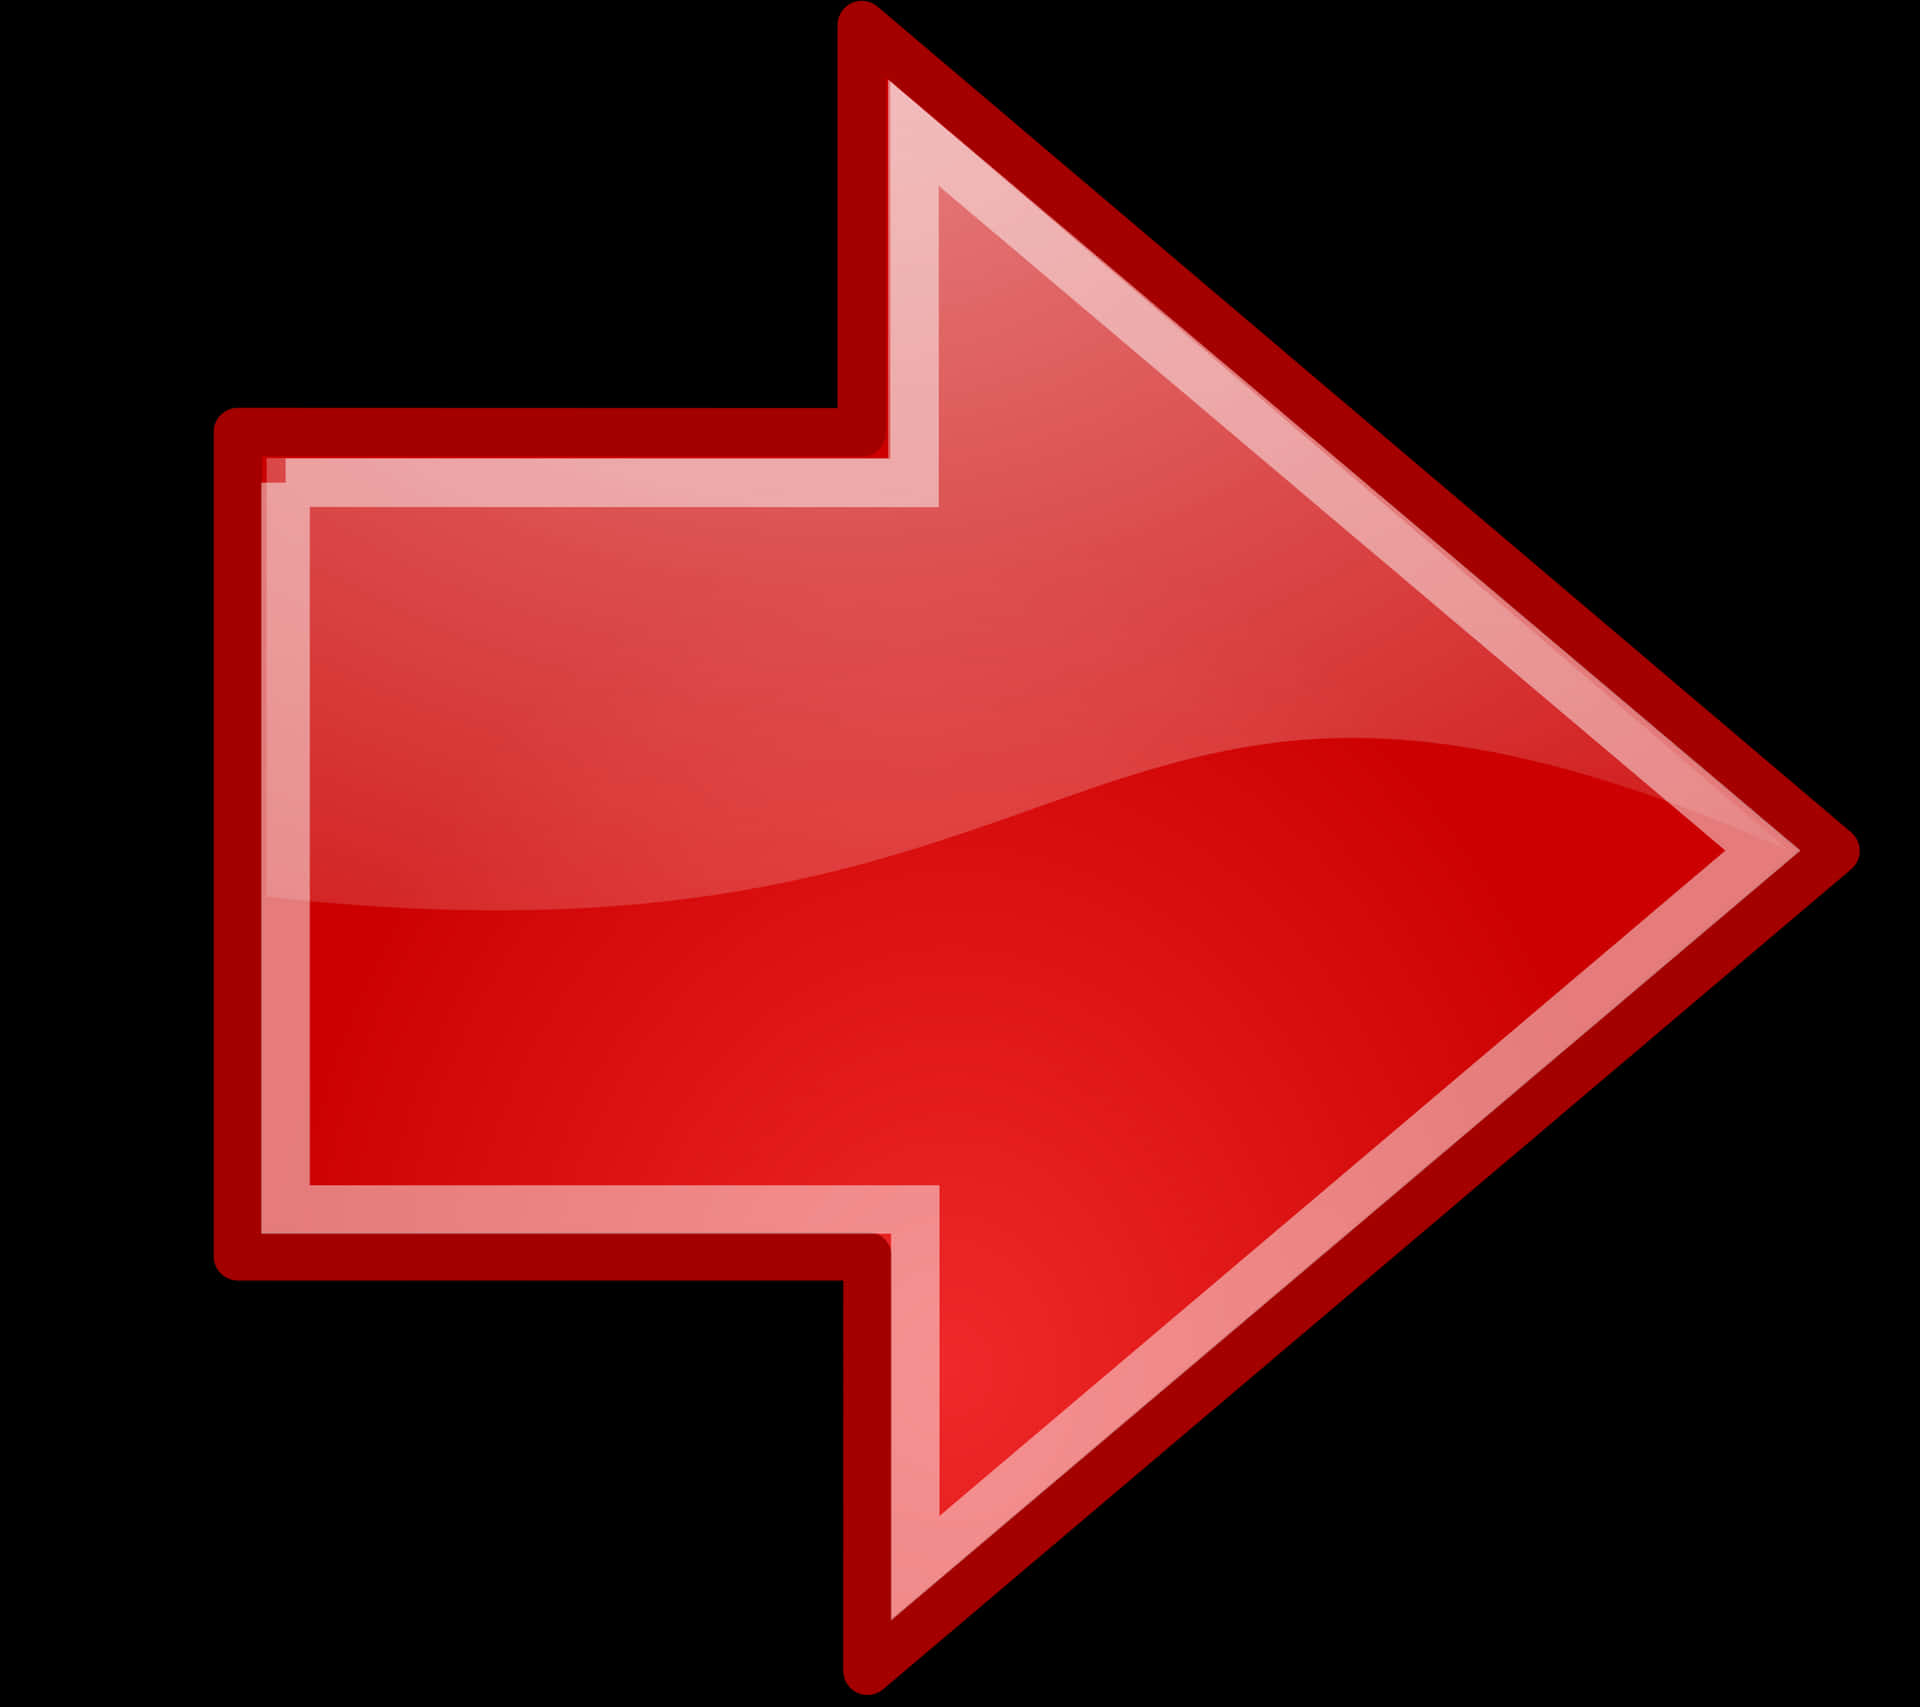 Glossy Red Arrow Graphic PNG image